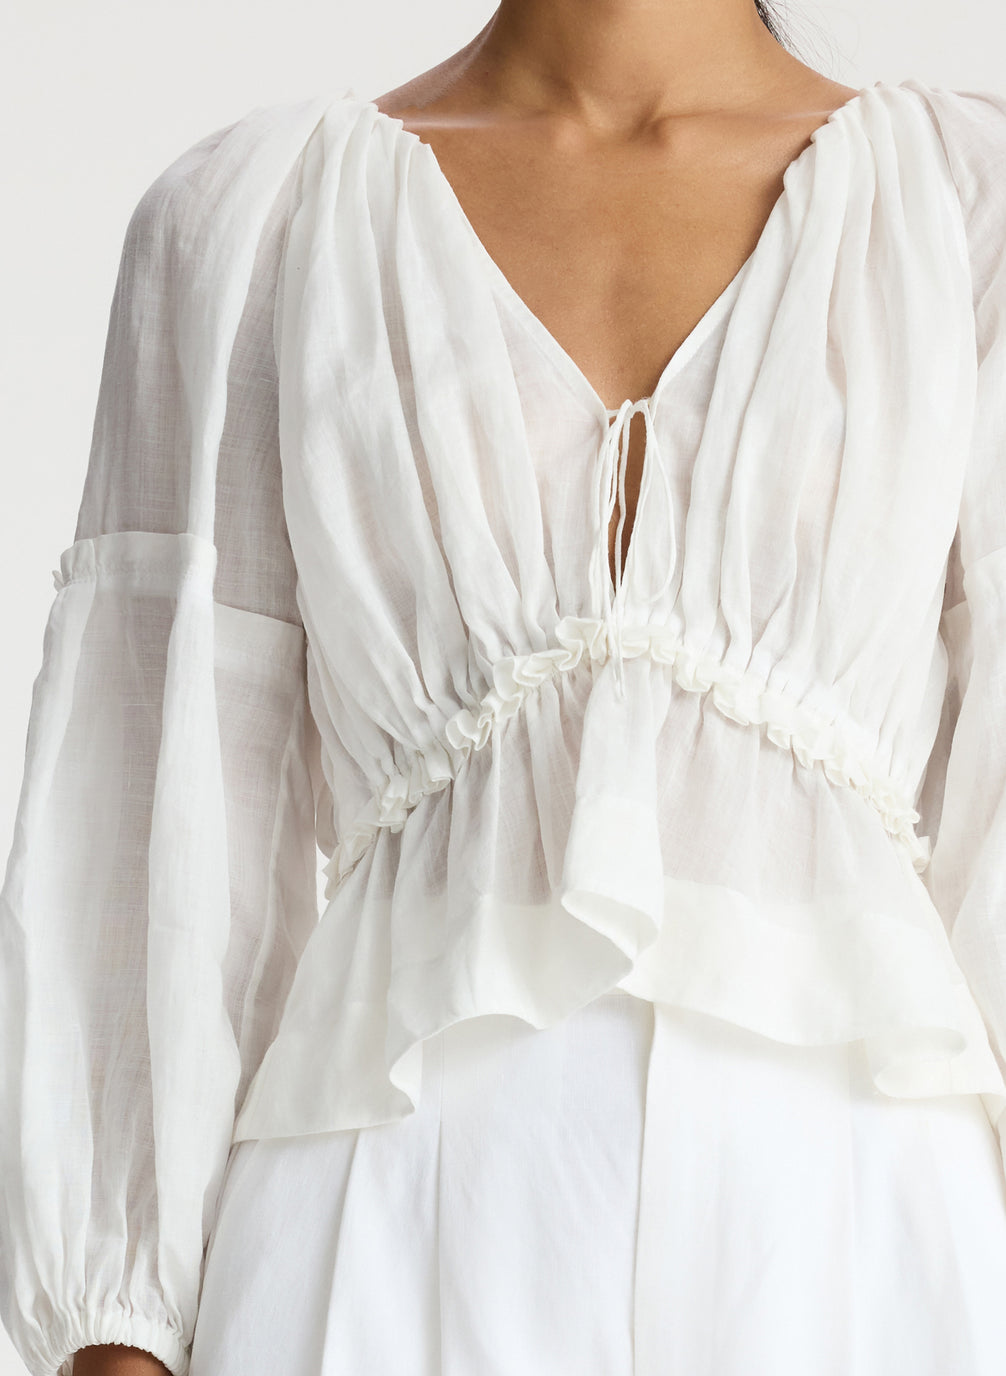 detail view of woman wearing white v neck blouse with peplum and white shorts